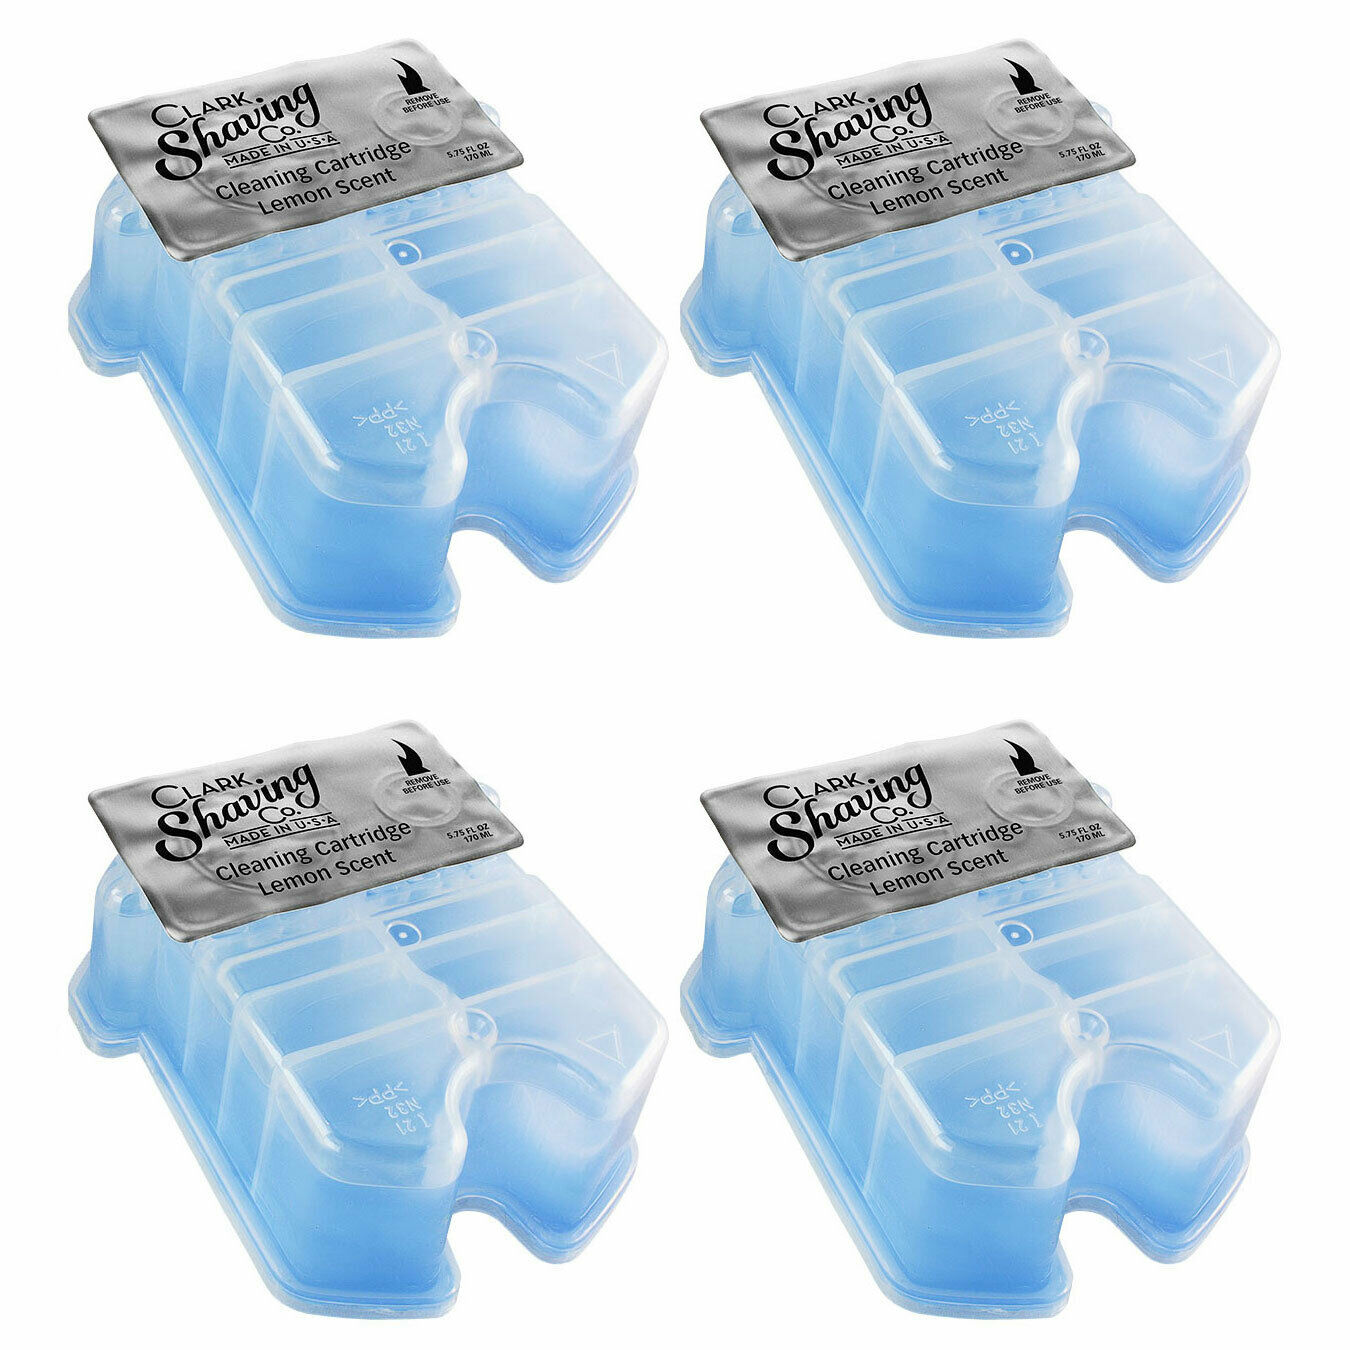 Refill Cartridges For Braun Clean & Renew Ccr, 4-pack